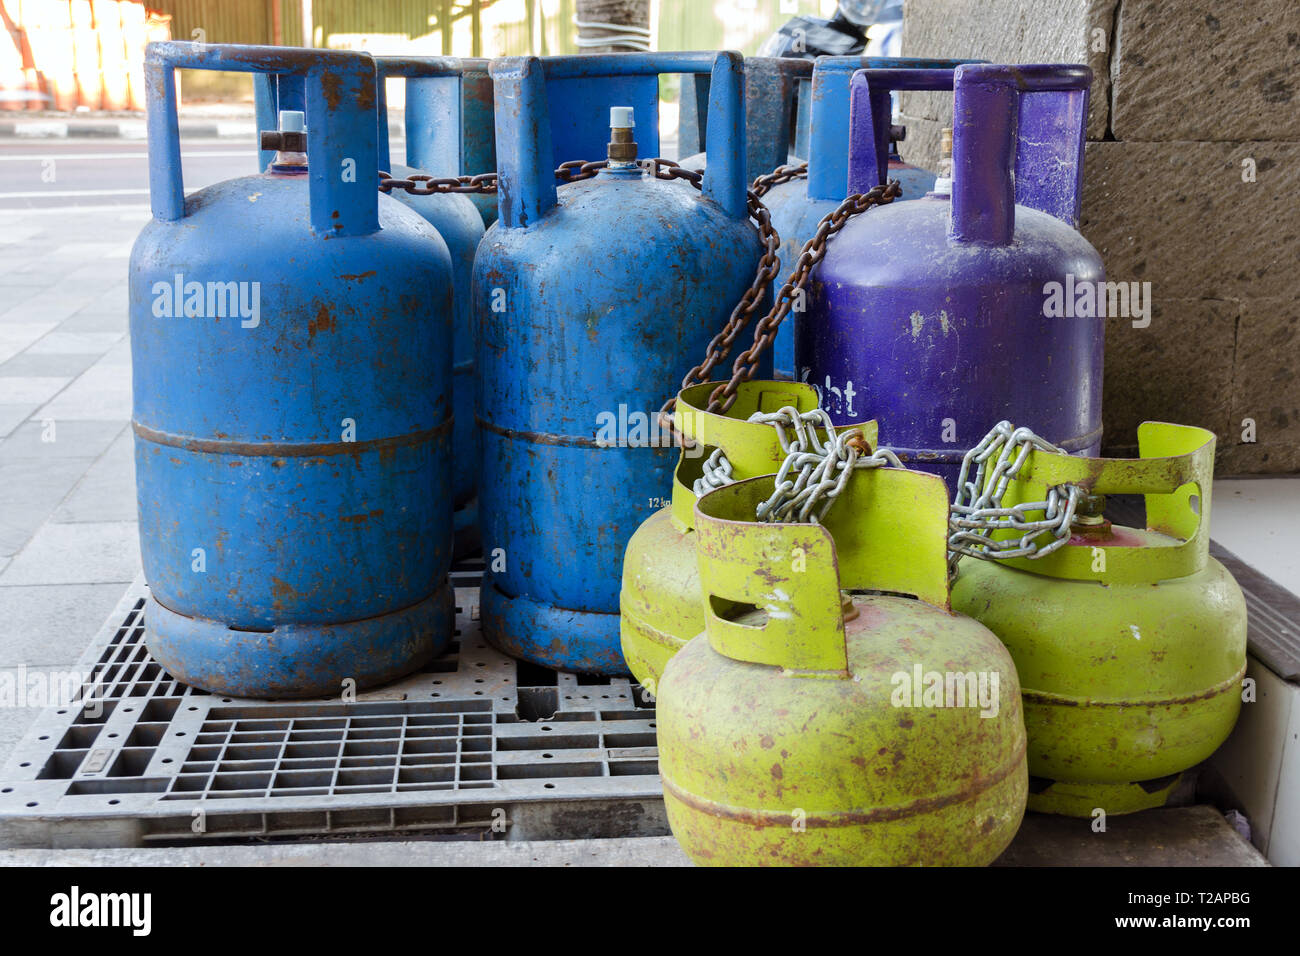 Multi-colored and different-sized gas cylinders on the street.  Bottles with liquefied petroleum gas (LPG), Propane-butane for home use. Bali Stock Photo